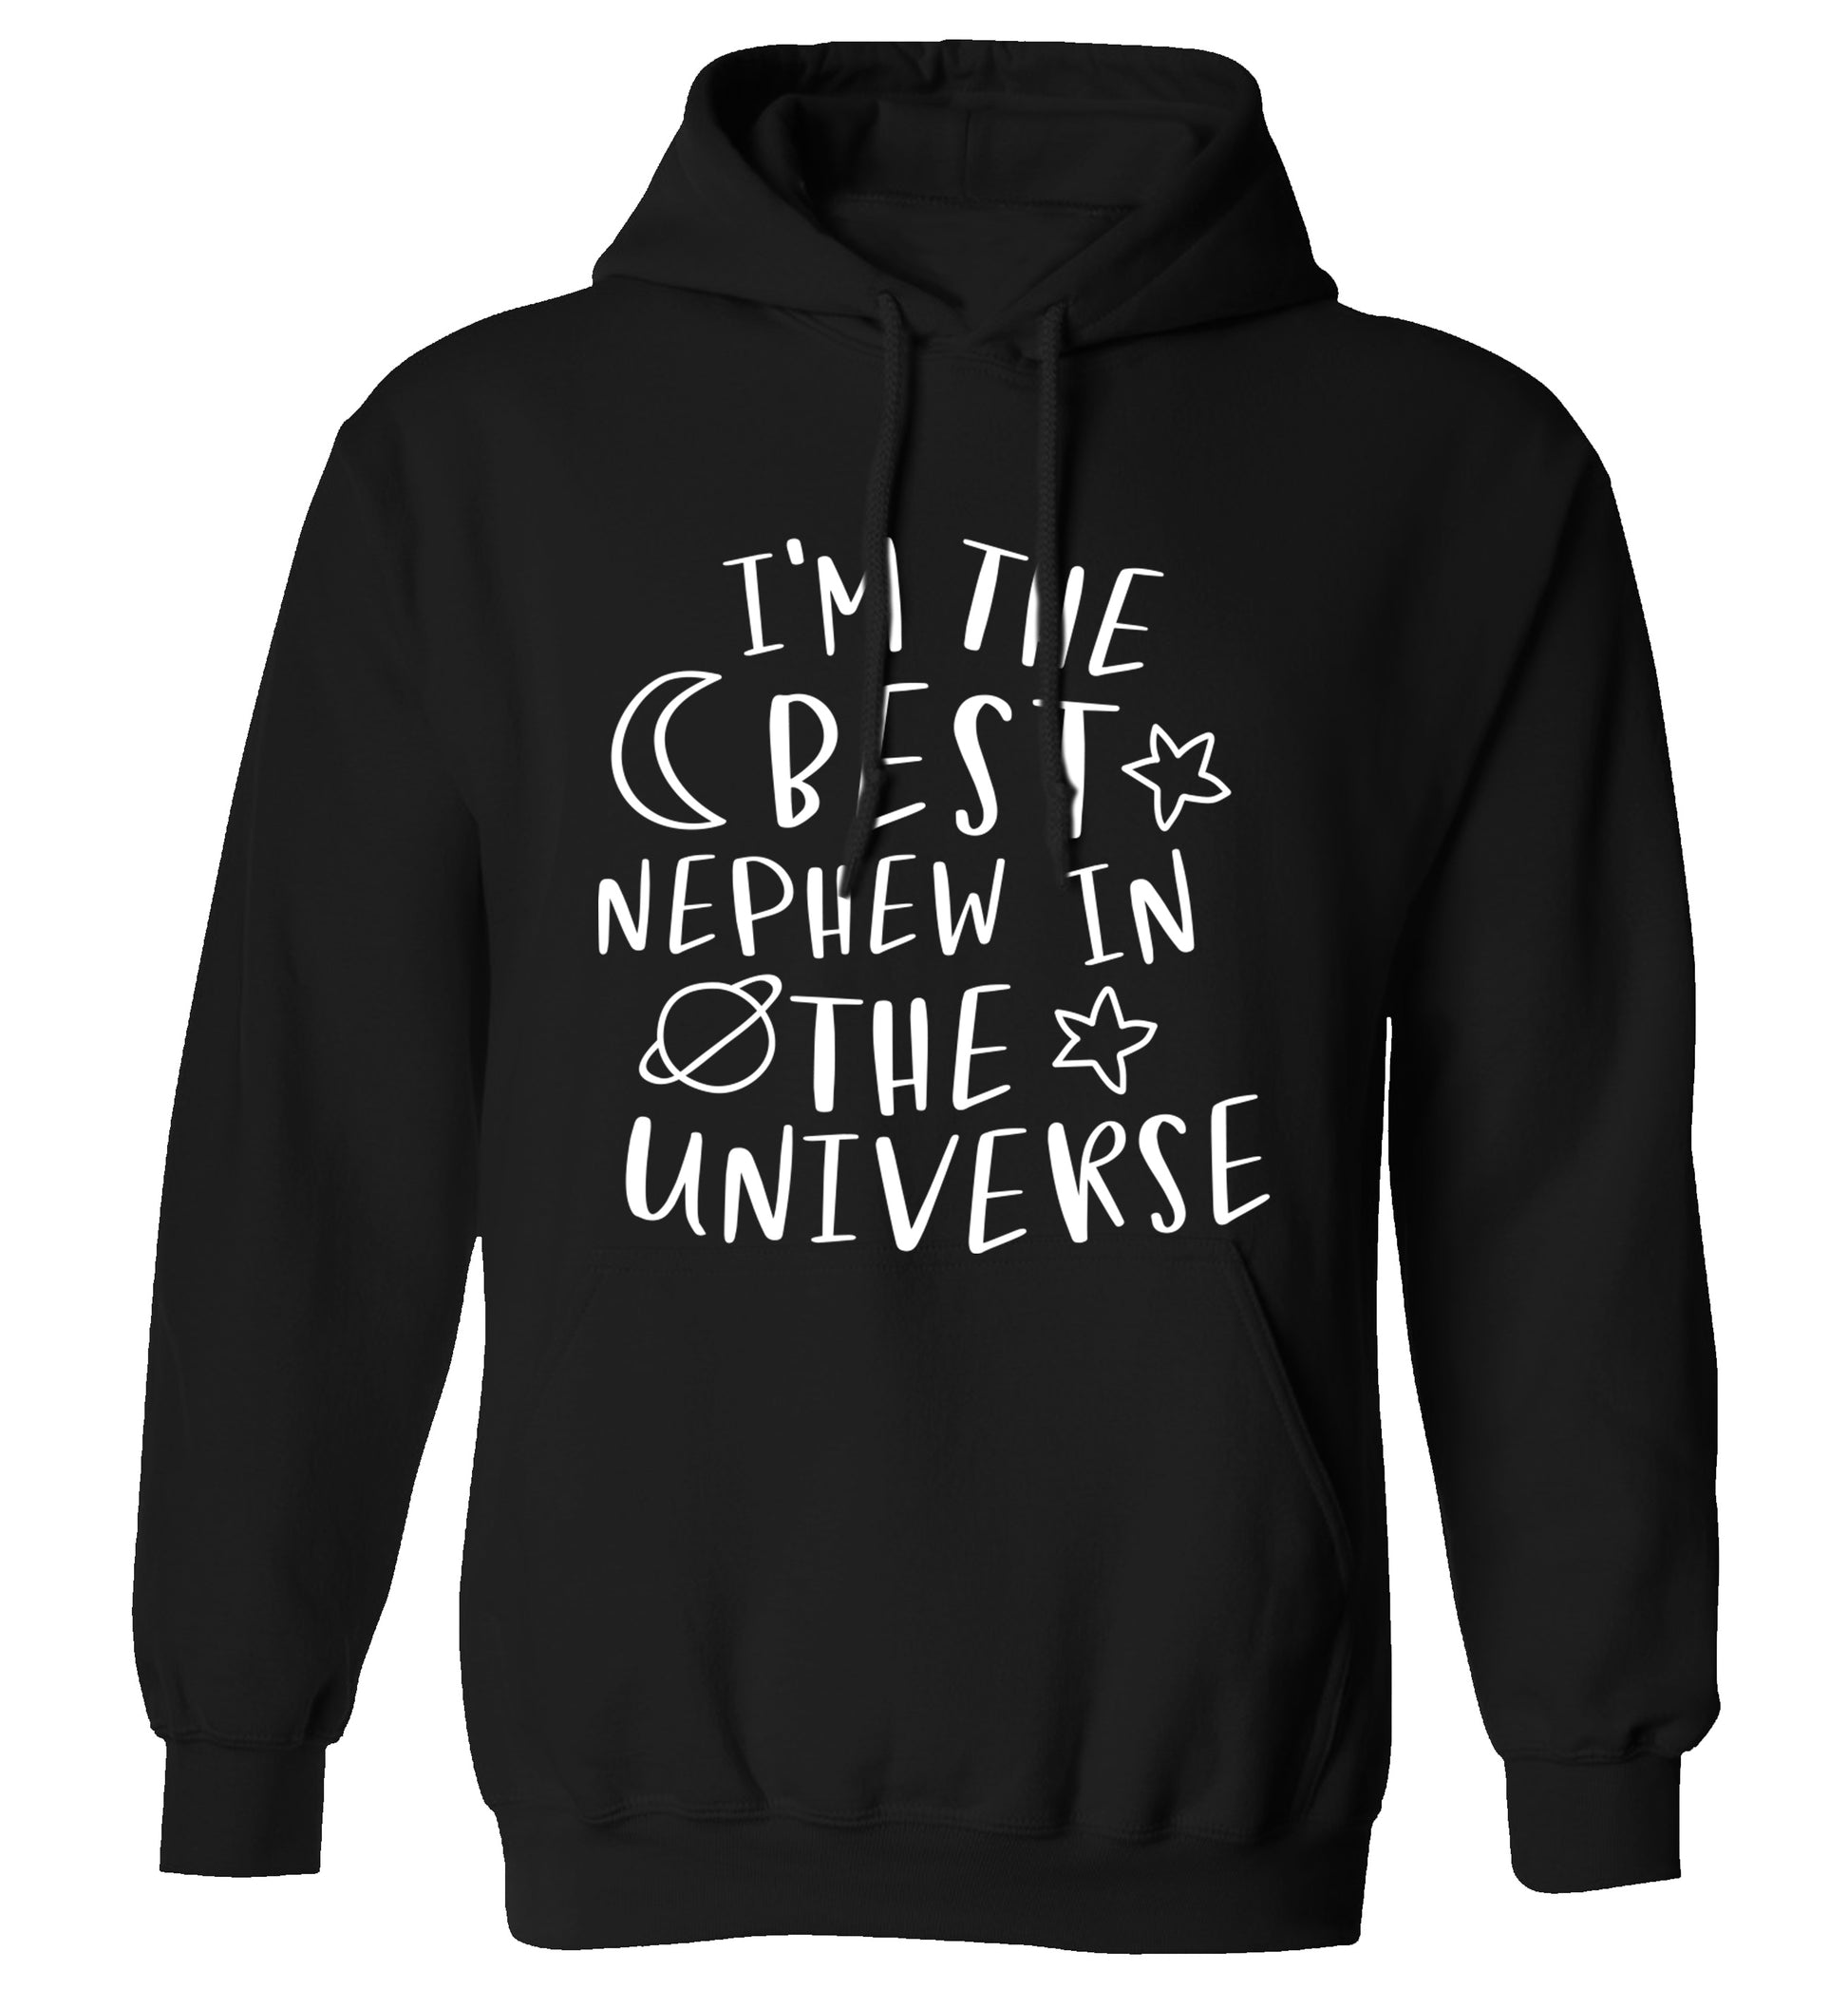 I'm the best nephew in the universe adults unisex black hoodie 2XL